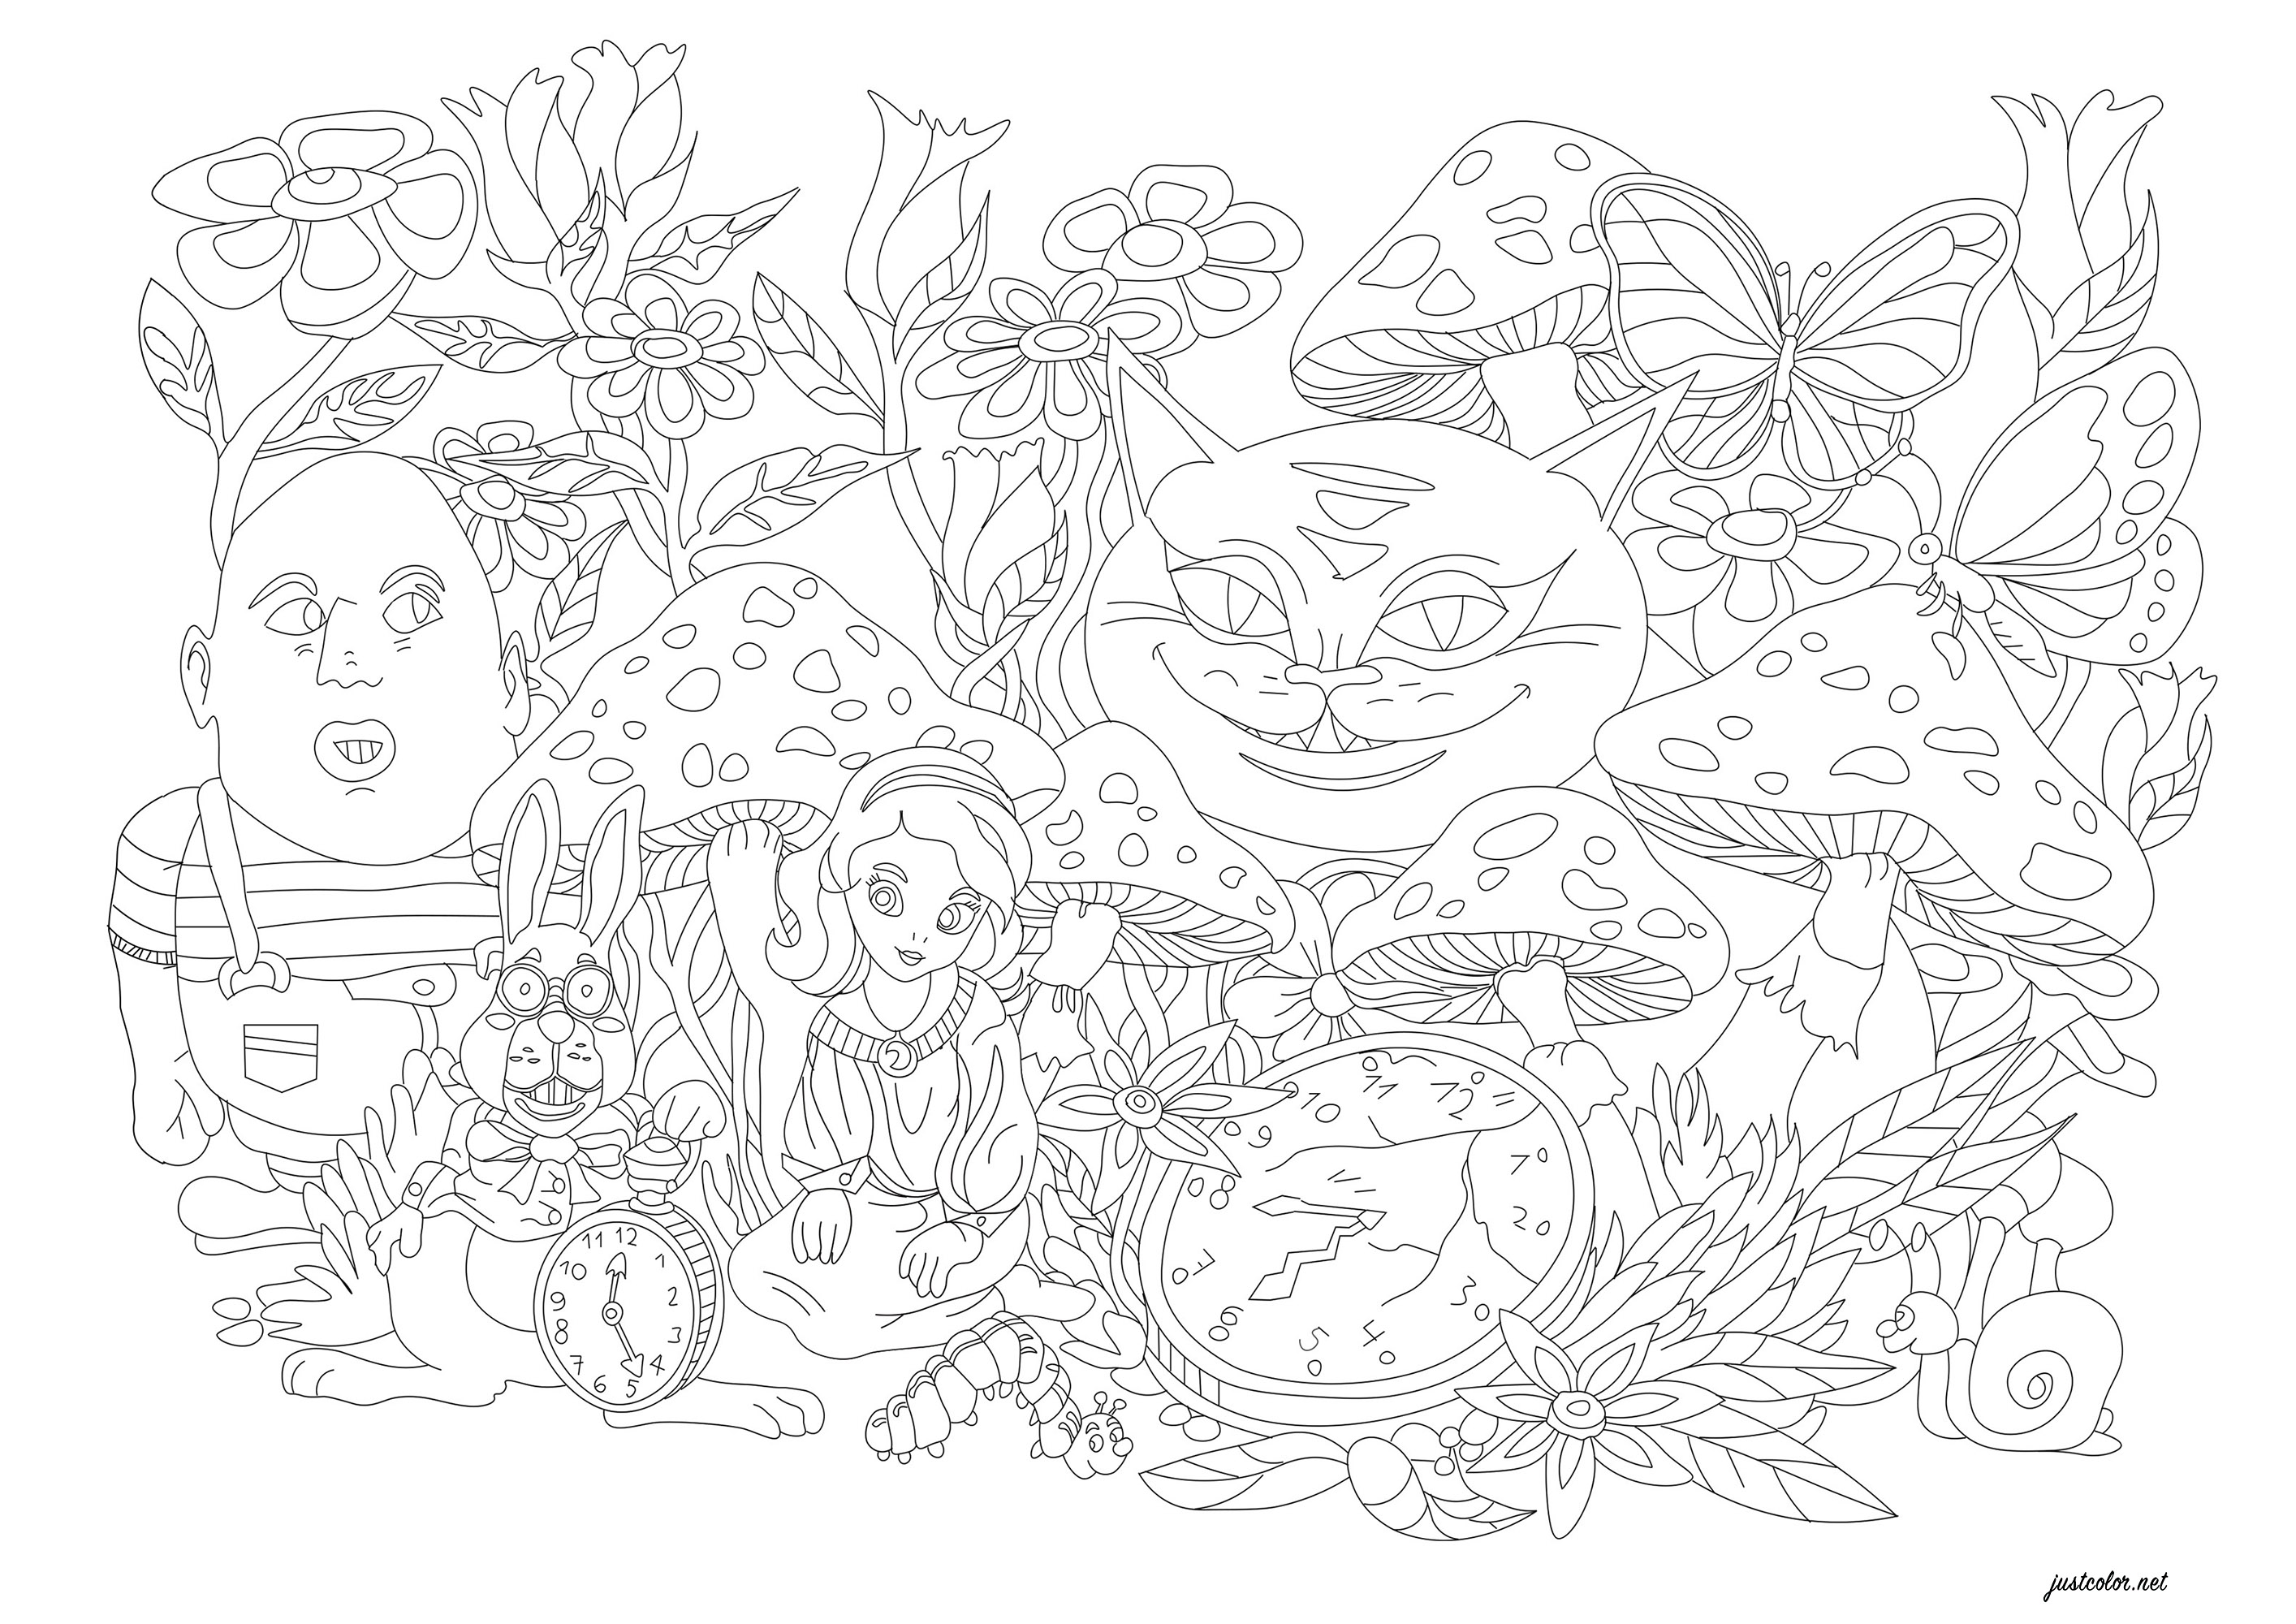 An illustration to color in reference to the book 'Alice's Adventures in Wonderland'. This is an English novel published in 1865 by Lewis Carroll. To color: fantastic flowers, monsters, the rabbit, monsters, a snail, butterflies and the wonderful Alice, Artist : Morgan